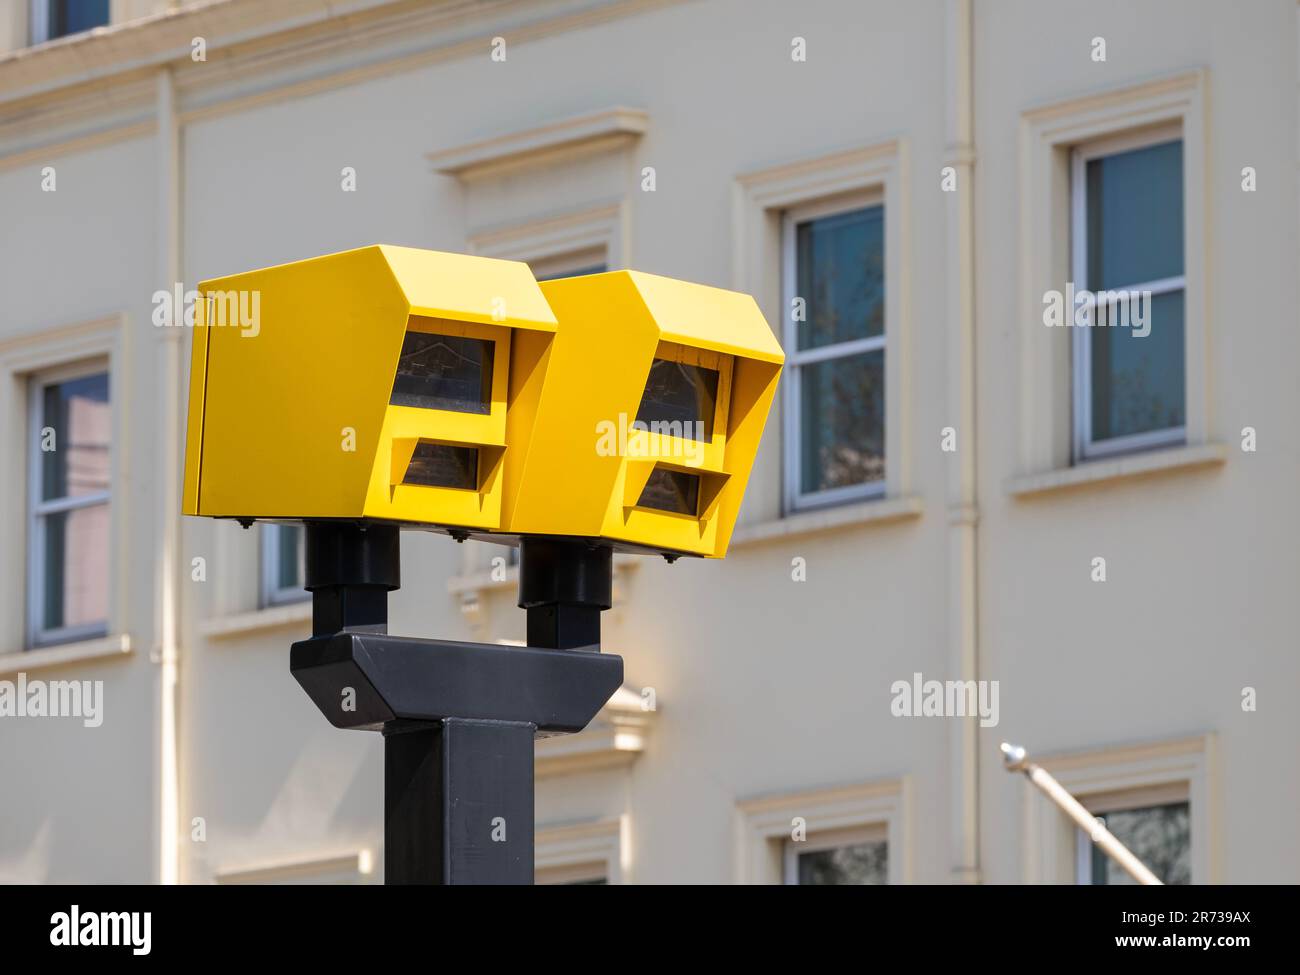 Low angle view of two bright yellow speed safety cameras against an urban background. Stock Photo